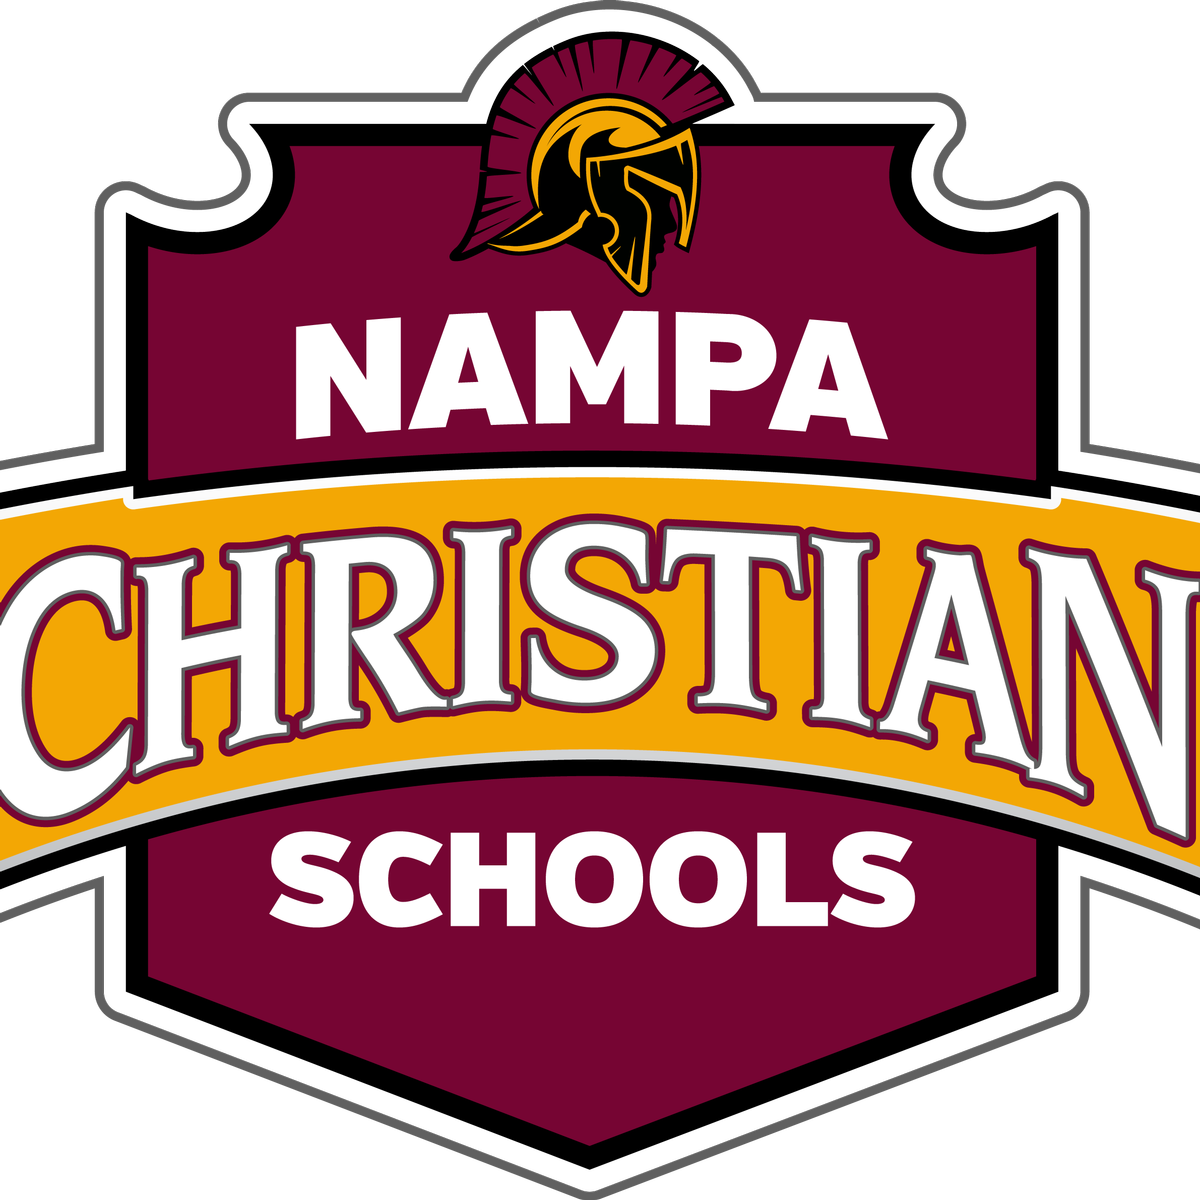 Current Dean Of Students Chad Kmiecik Promoted To Role - Nampa Christian Elementary School (1200x1200)